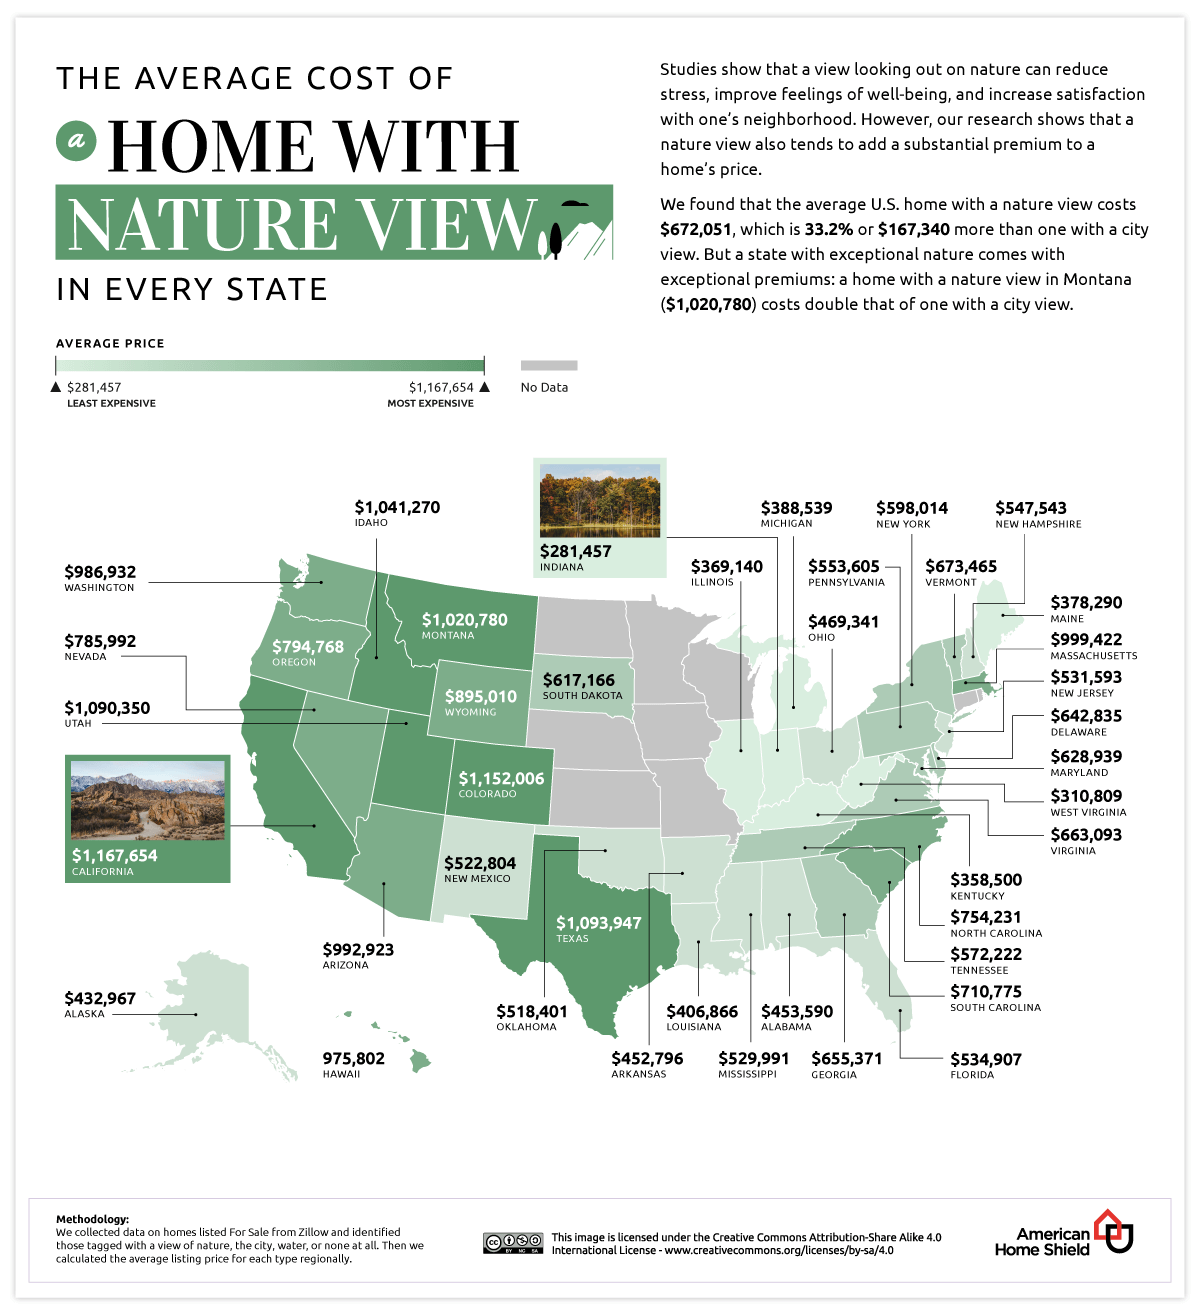 Average cost of homes with a Nature View in Every State